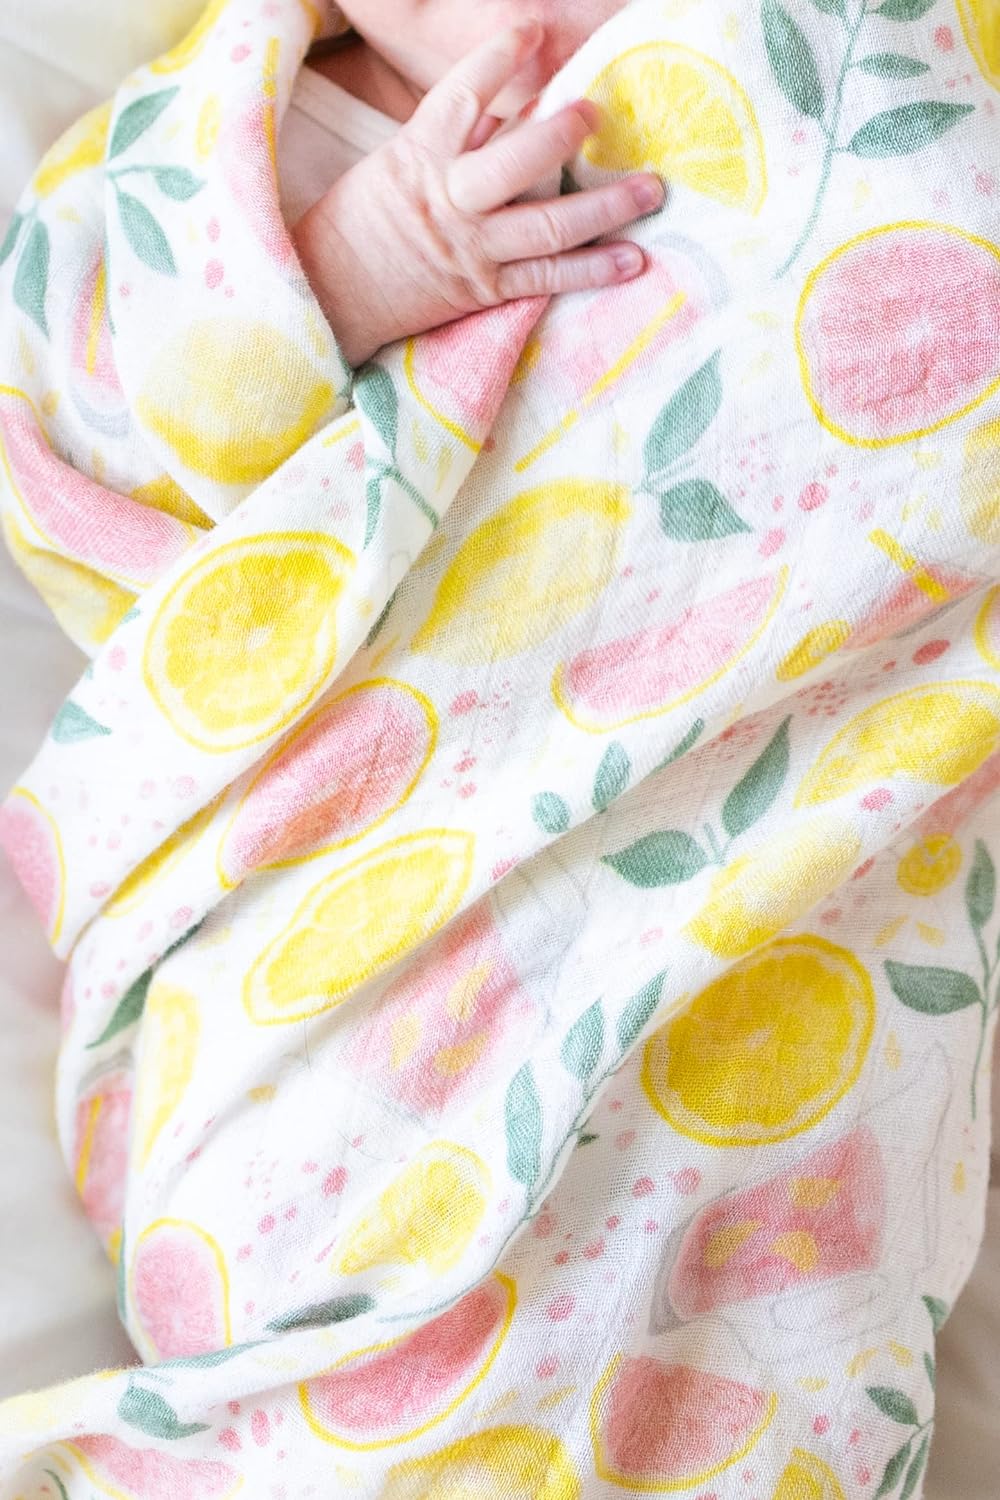 Florida Kid Co. Pink Lemonade Baby Swaddle Blanket - 70% Viscose from Bamboo/ 30% Cotton Muslin - Silky Soft, Breathable, Lightweight, Large - 47 in. x 47 in.